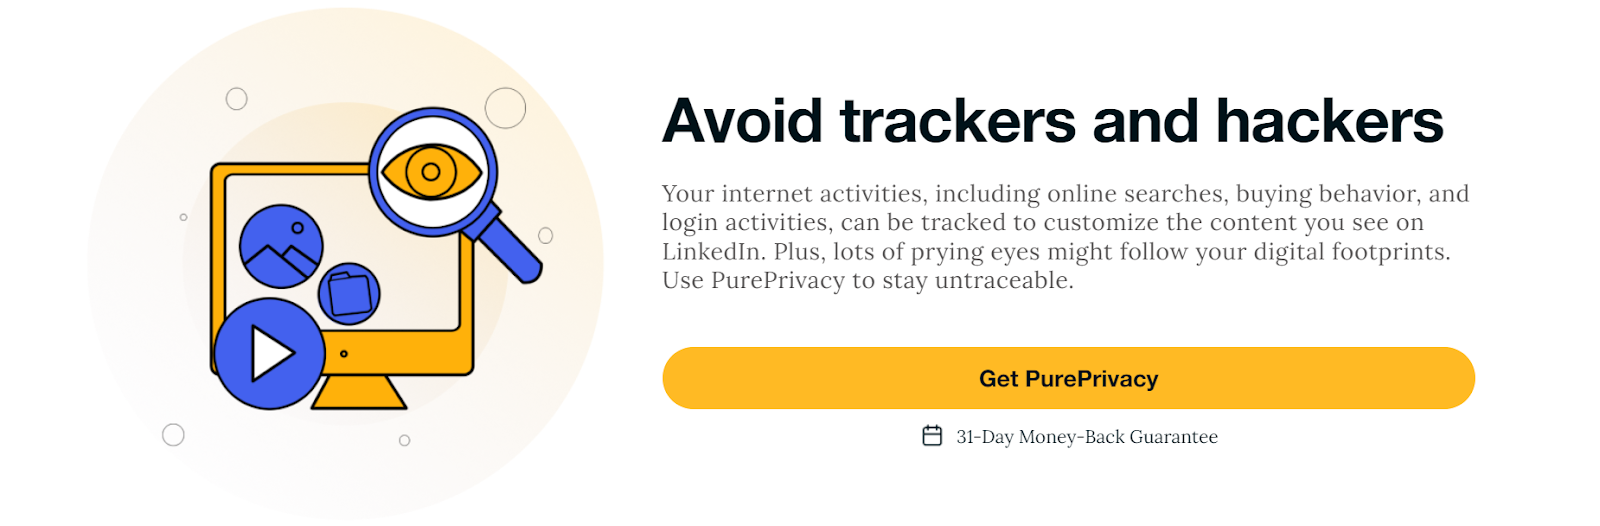 Avoid trackers & hackers using pureprivacy